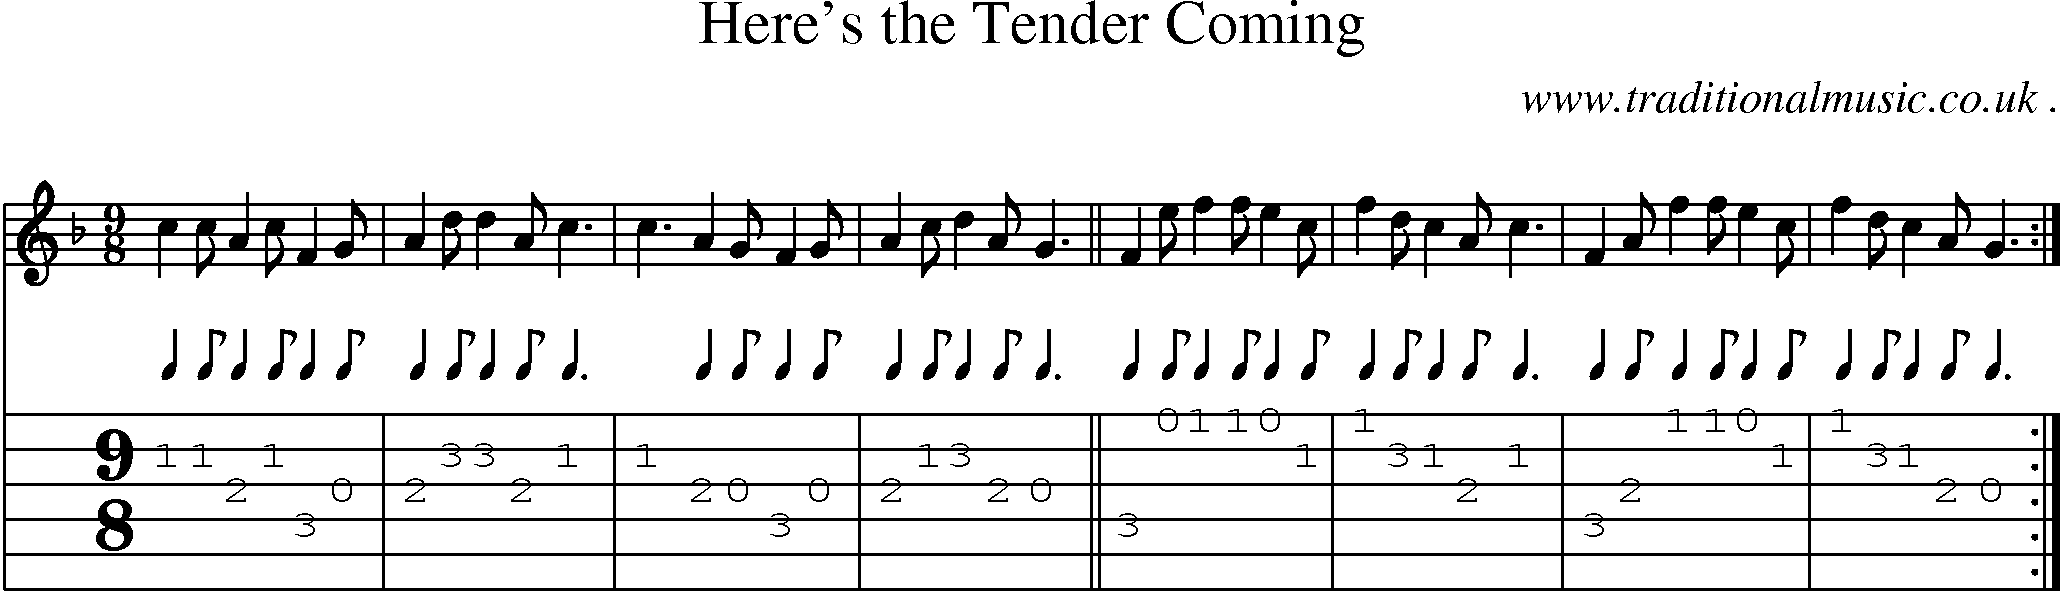 Sheet-Music and Guitar Tabs for Heres The Tender Coming